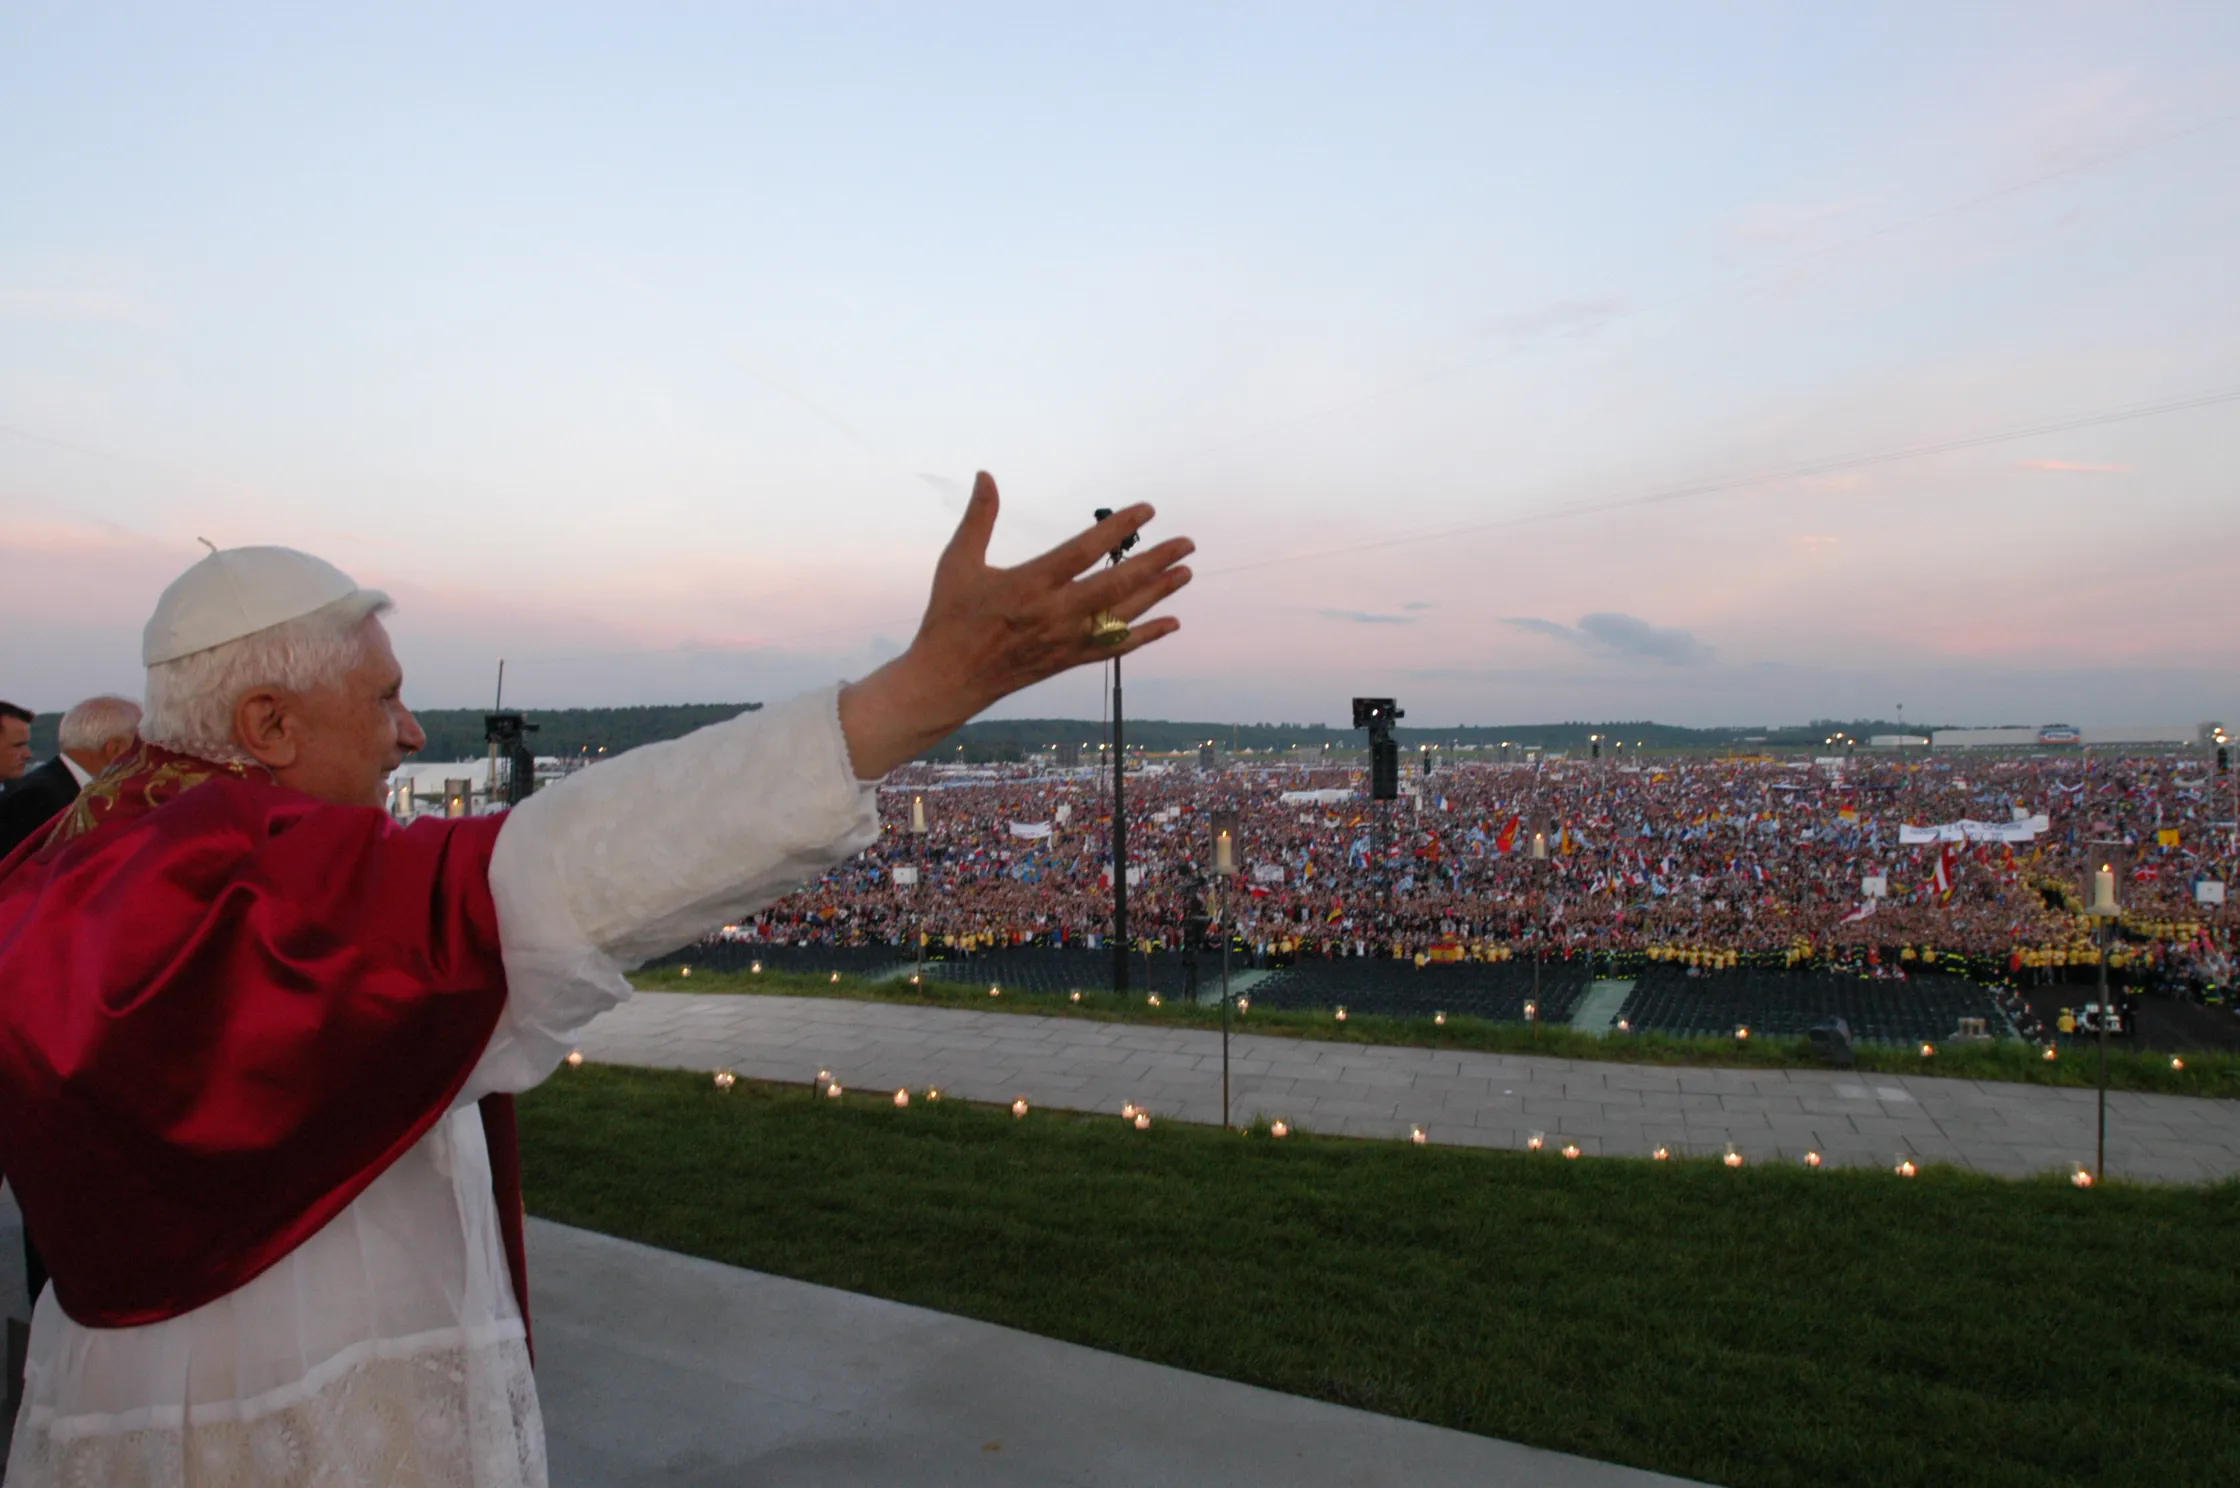 Pope Benedict XVI returns to his homeland for his first international event since being elected pope. He participated in World Youth Day in Cologne, Germany Aug. 16–21, 2005.?w=200&h=150